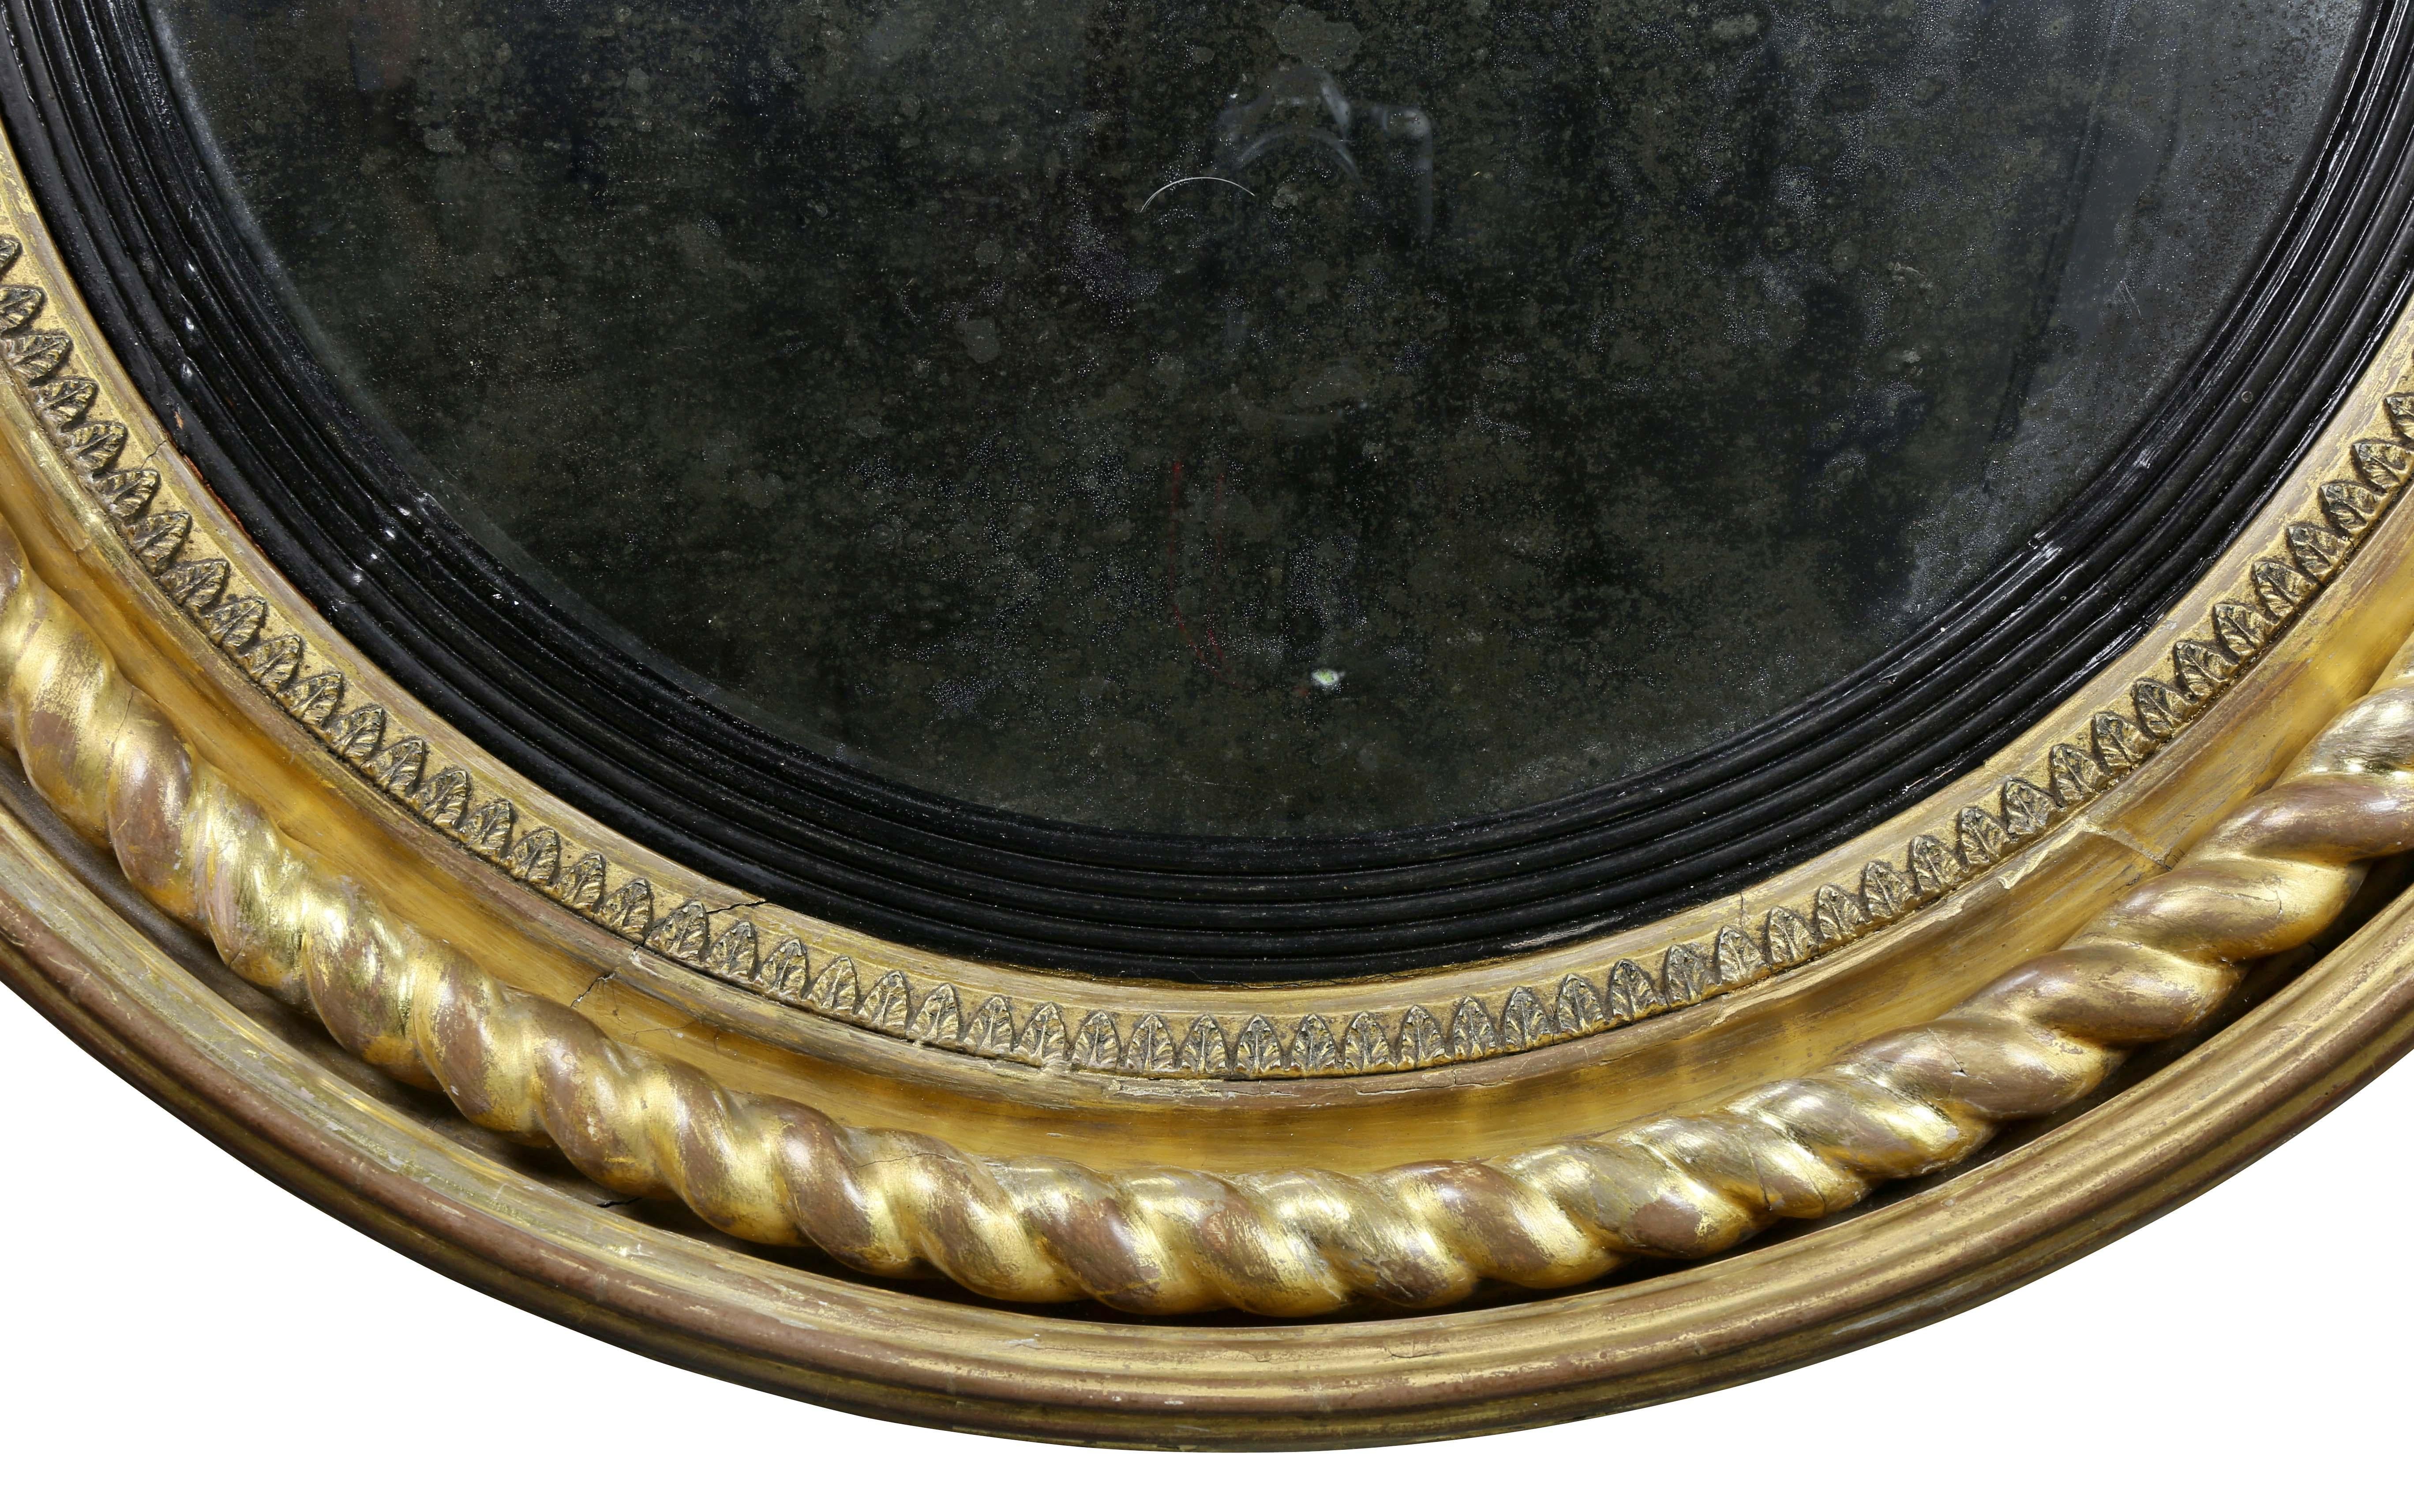 Circular with rope twist and leaf tip decoration, ebonized inner band, old glass.